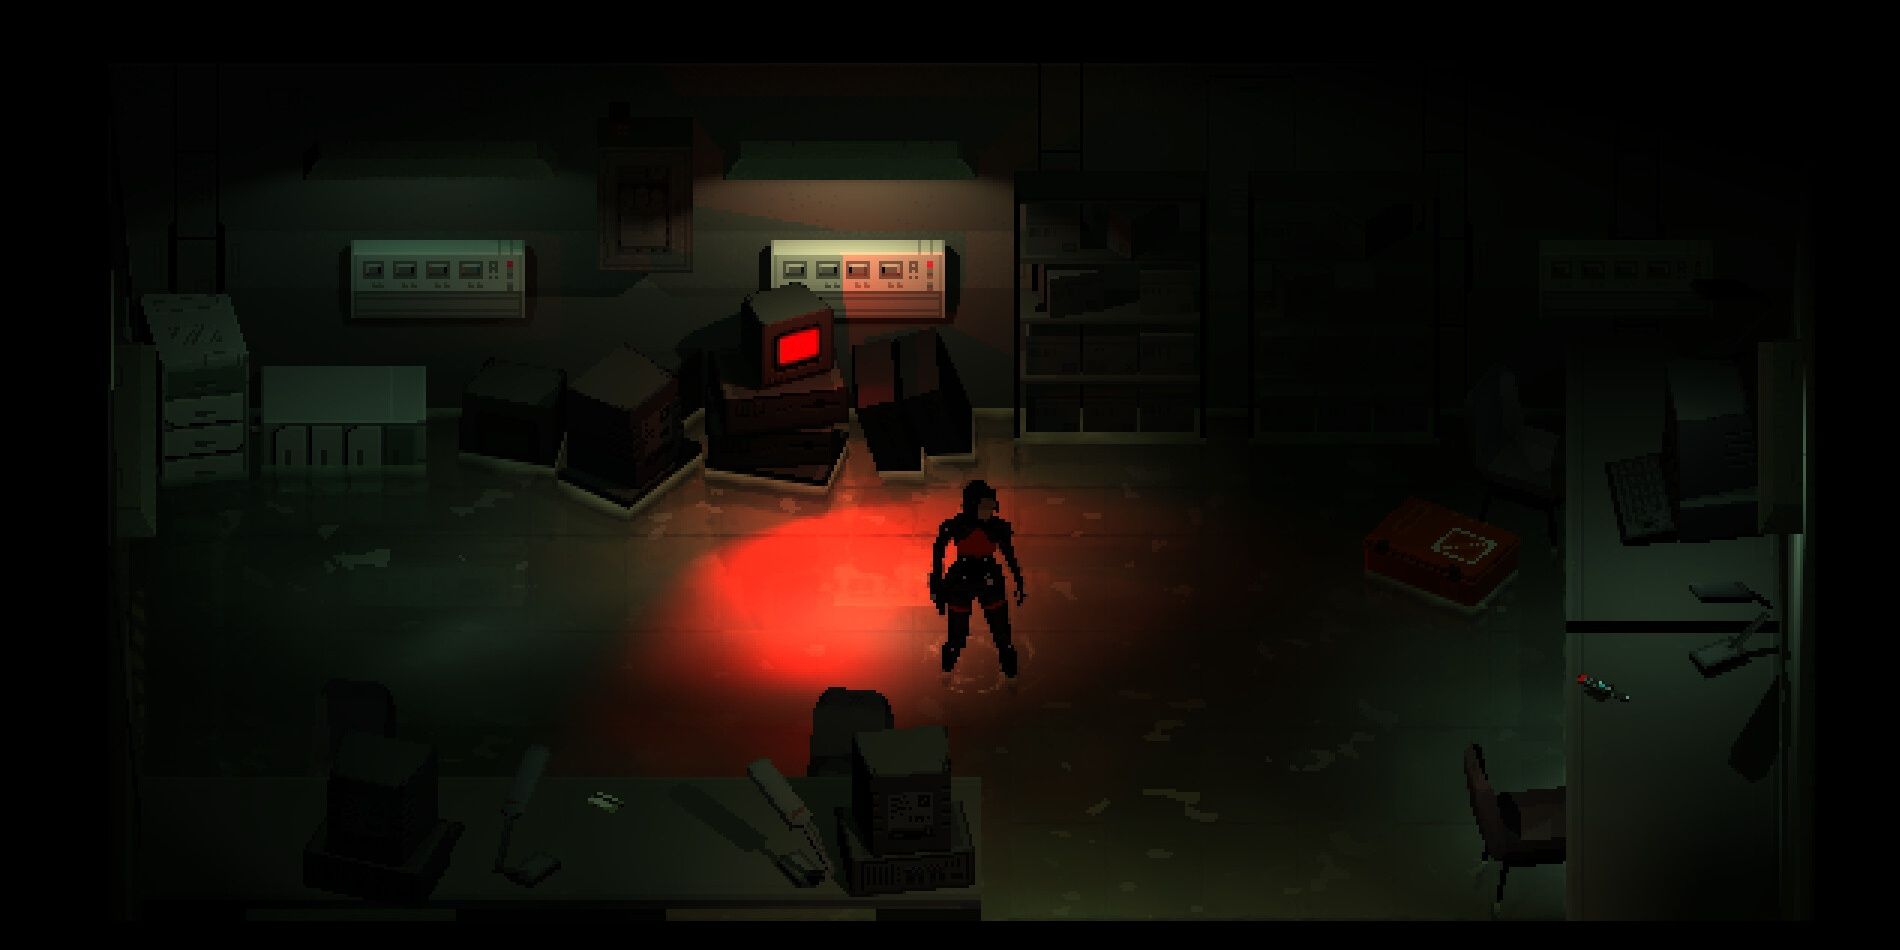 Elster standing in a watery room with a faint red light beneath her.